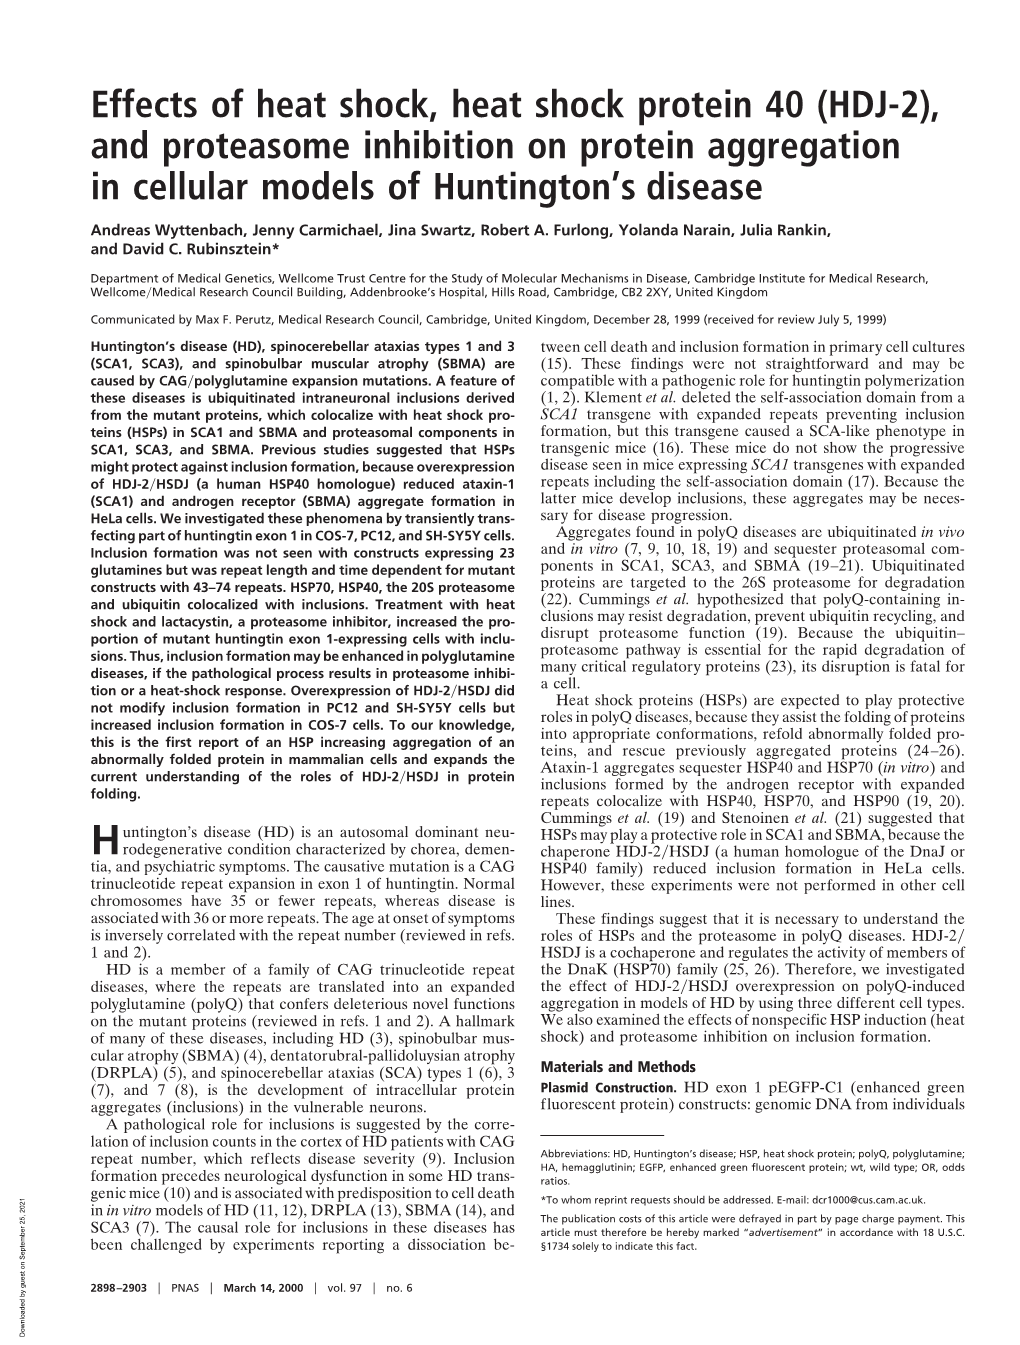 (HDJ-2), and Proteasome Inhibition on Protein Aggregation in Cellular Models of Huntington’S Disease